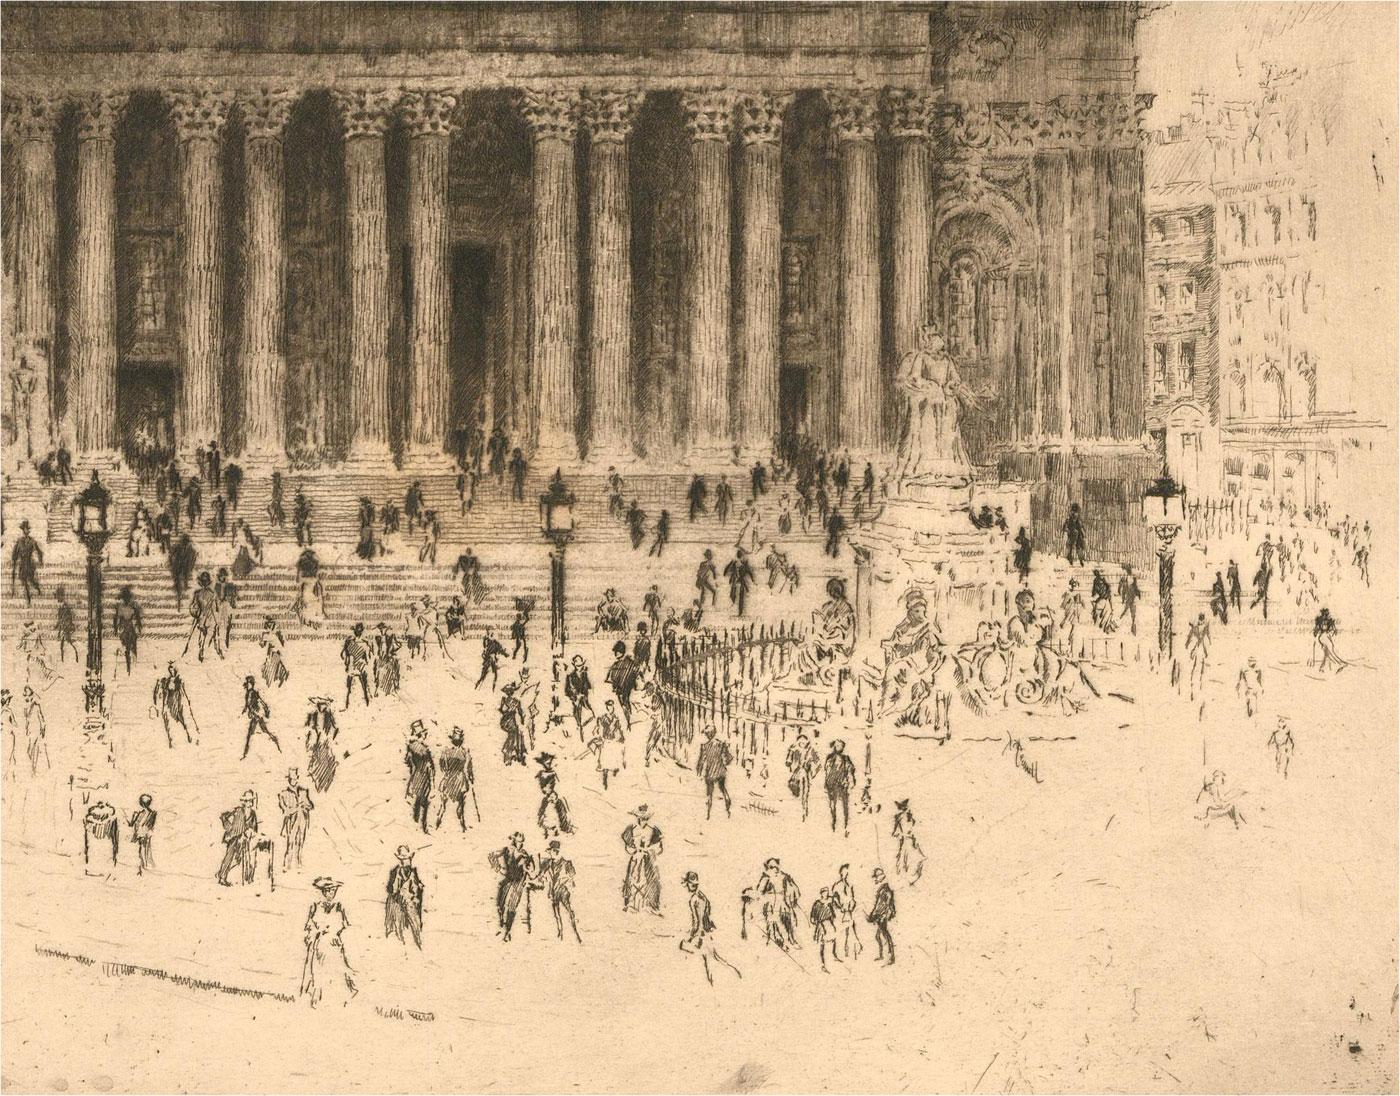 Joseph Pennell (1857-1926) - 1910 Etching, The Pavement at St. Pauls 2